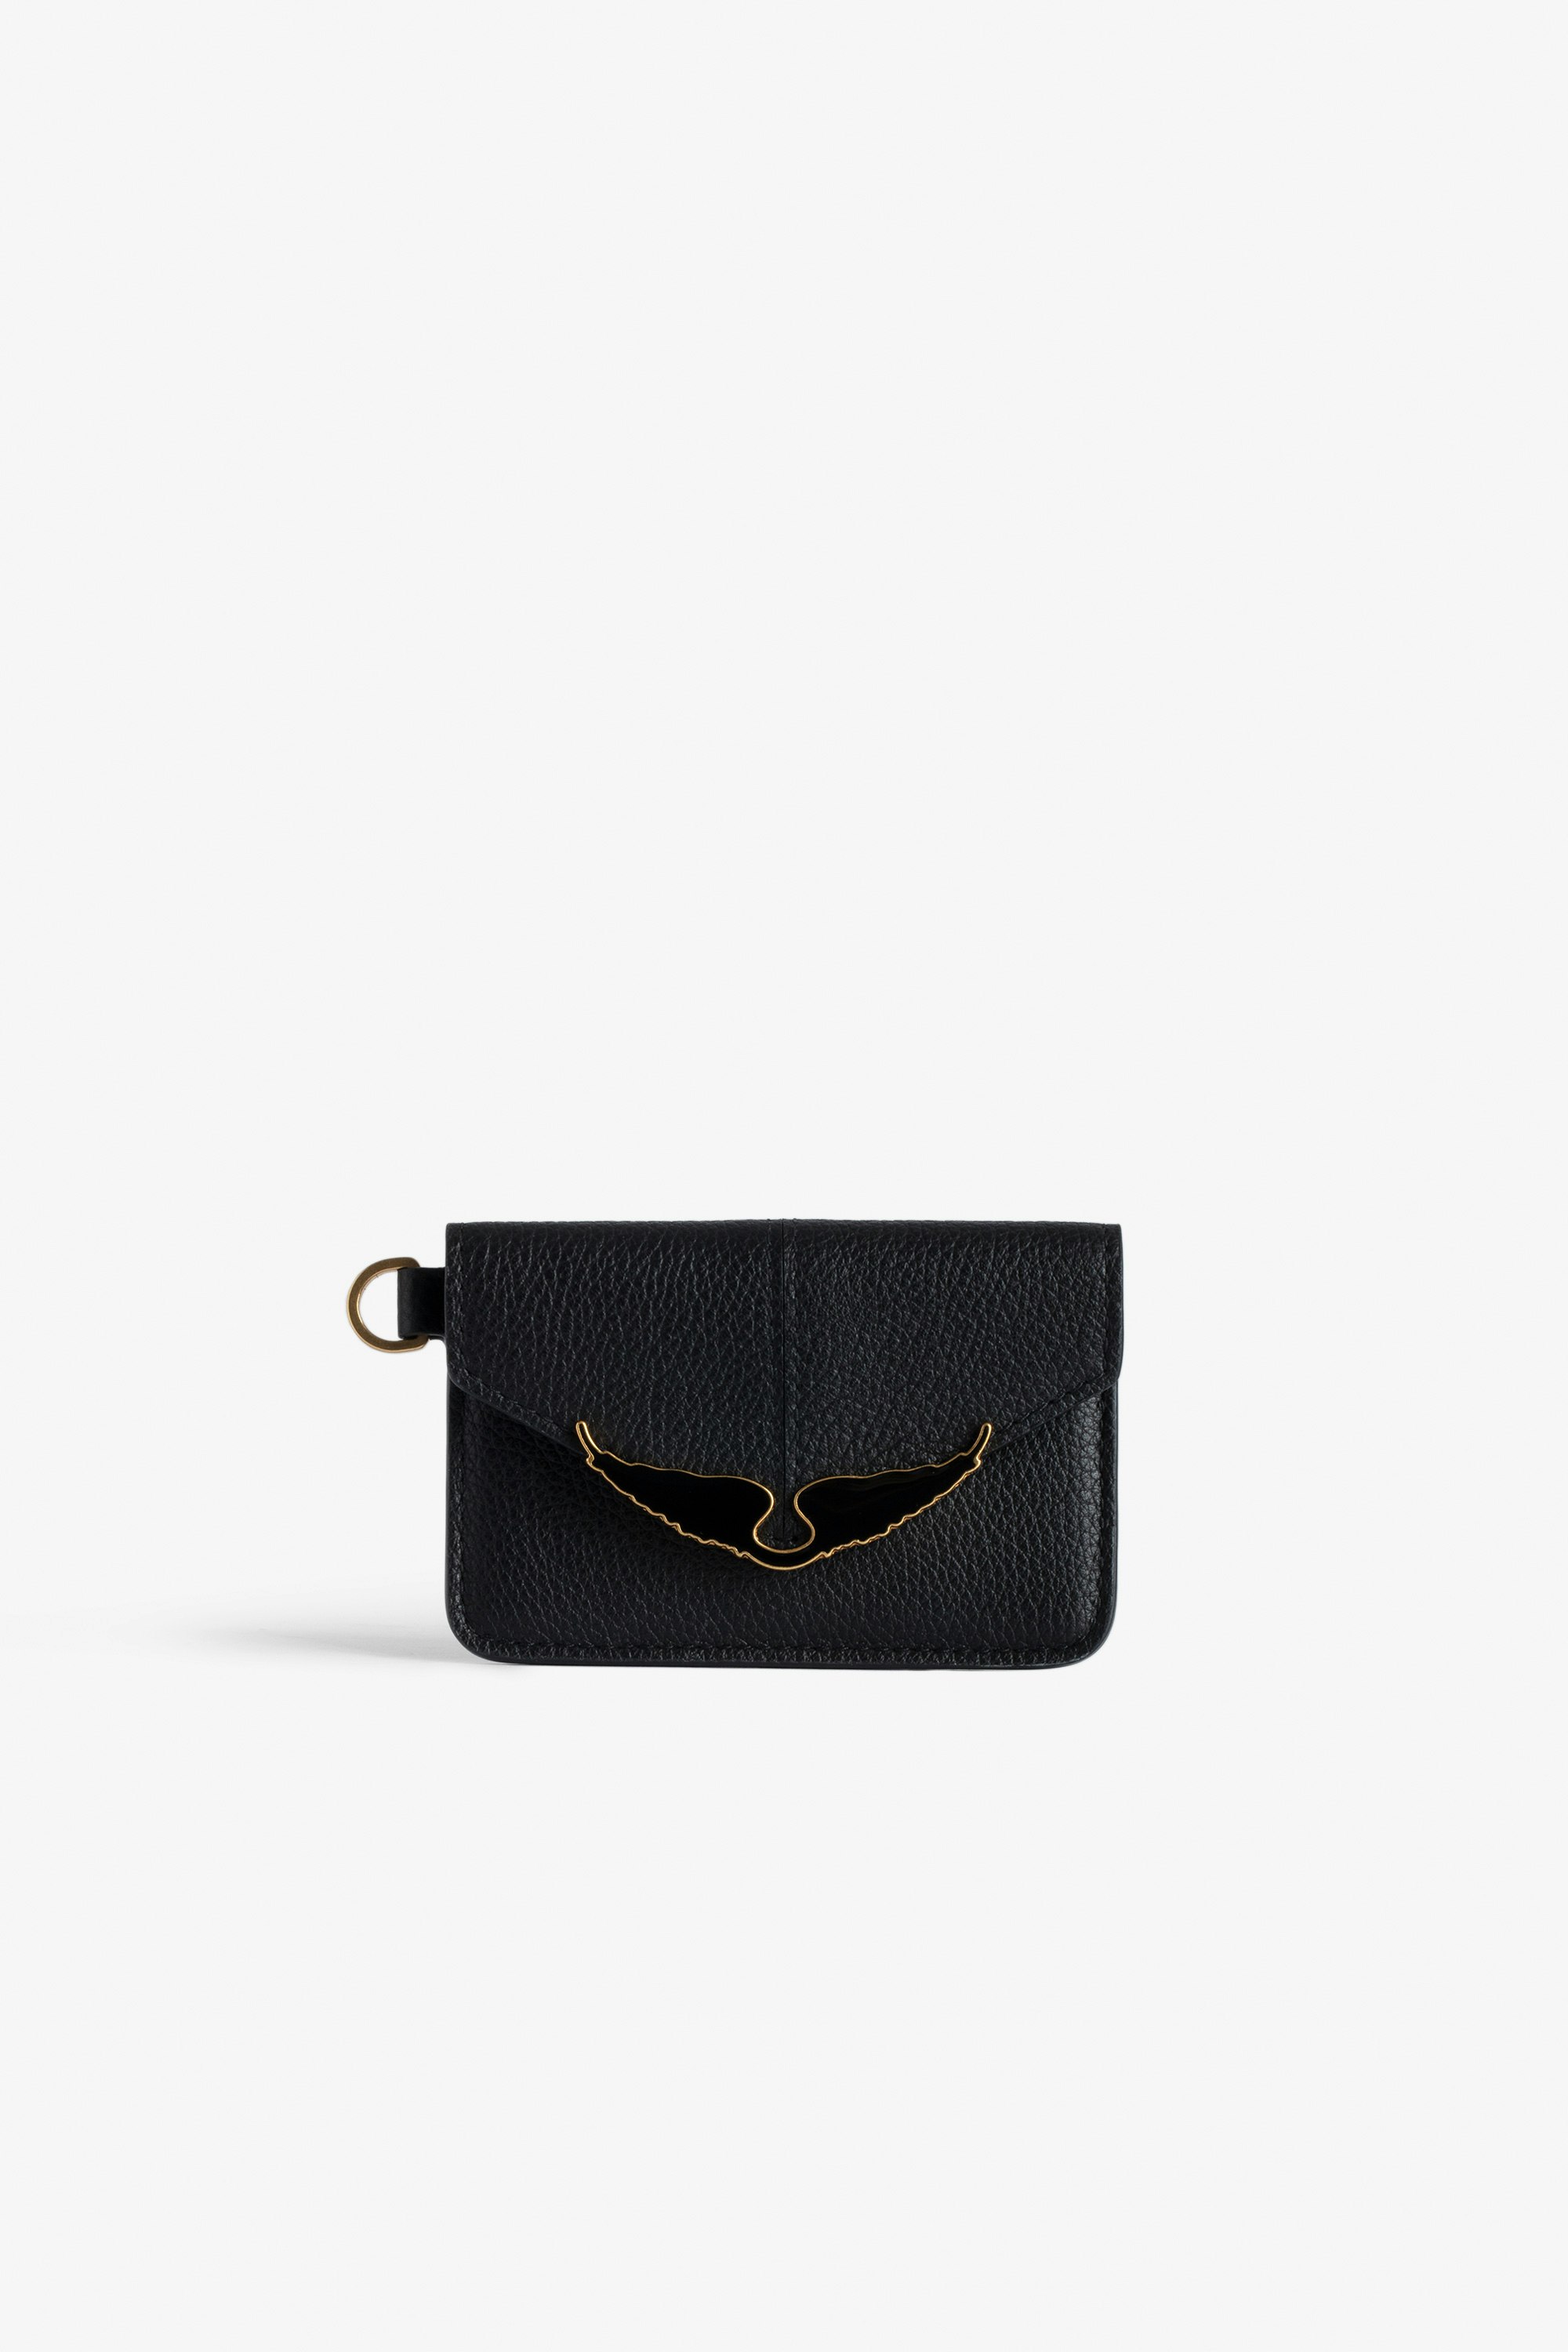 Borderline Pass Card Case Women’s black grained patent leather envelope card holder with wings charm.